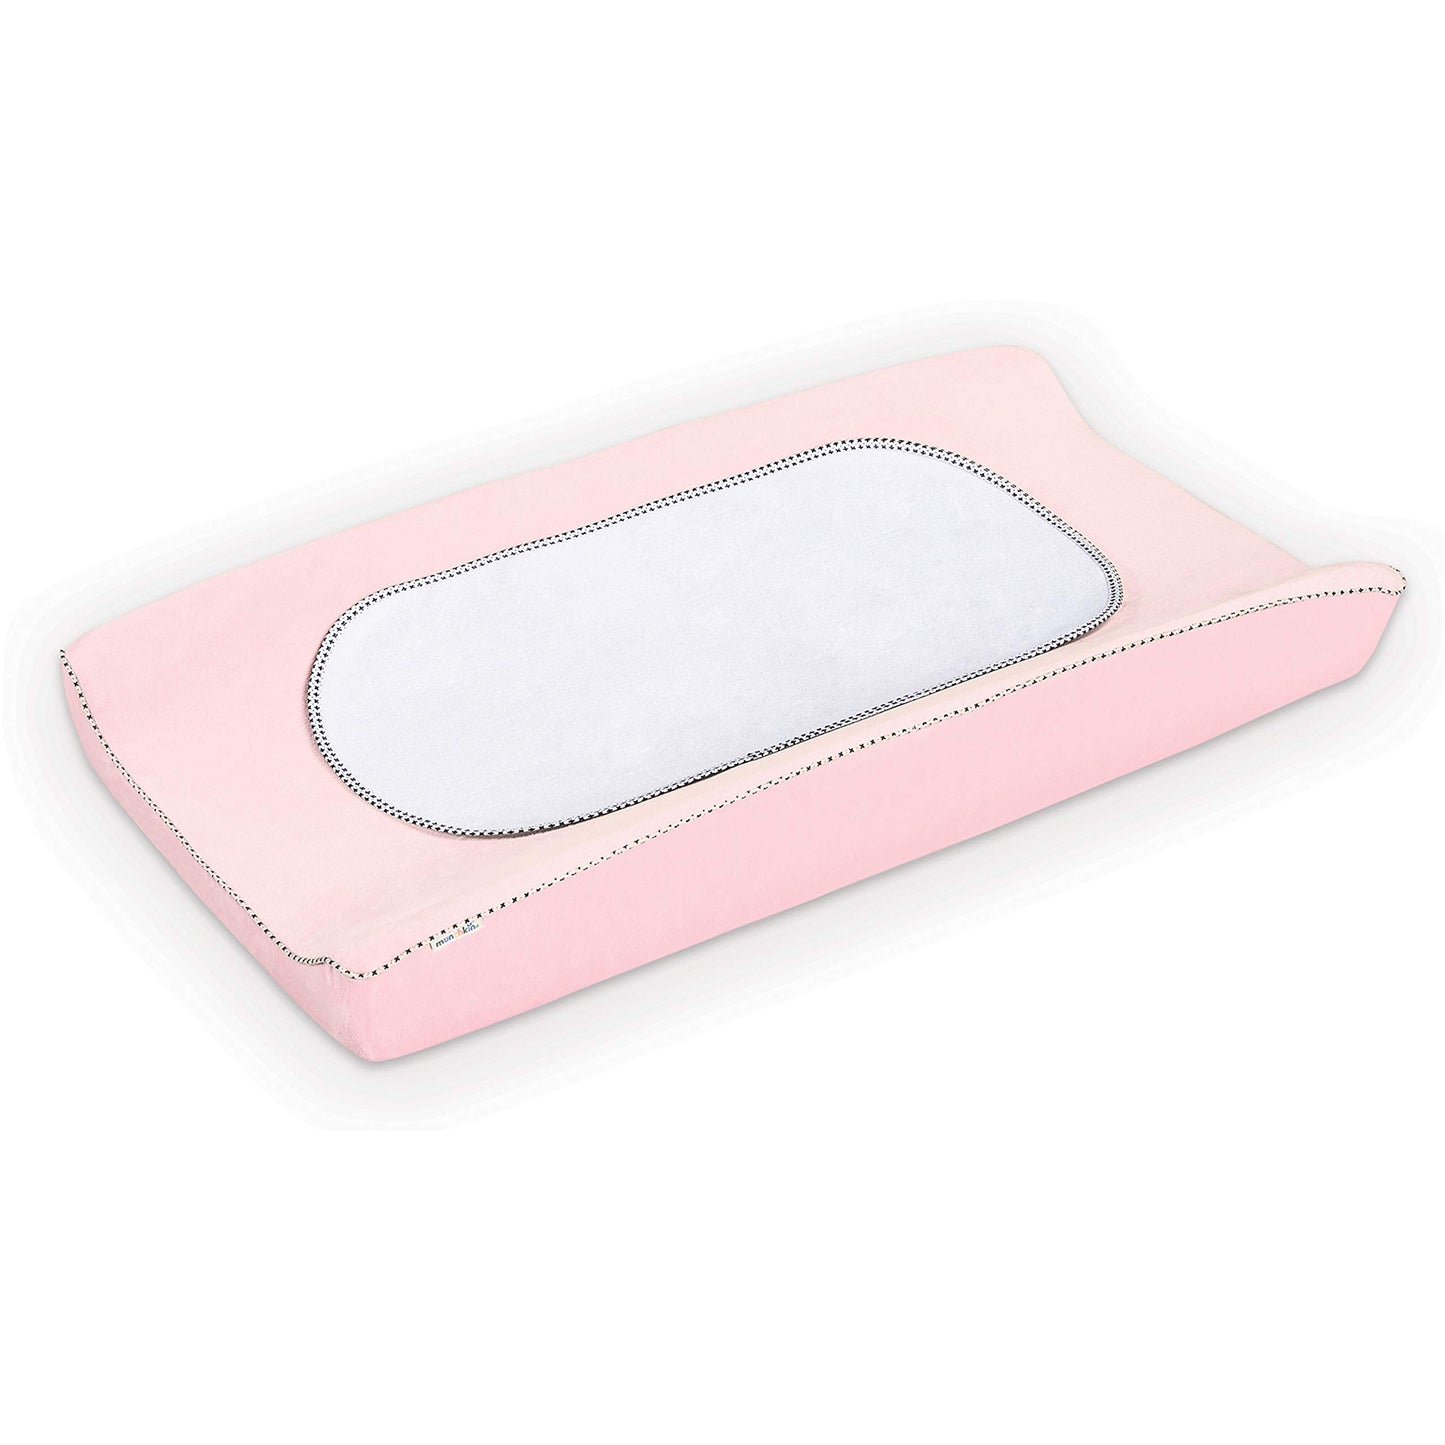 Munchkin Waterproof Changing Pad Liners, Pack of 3, White